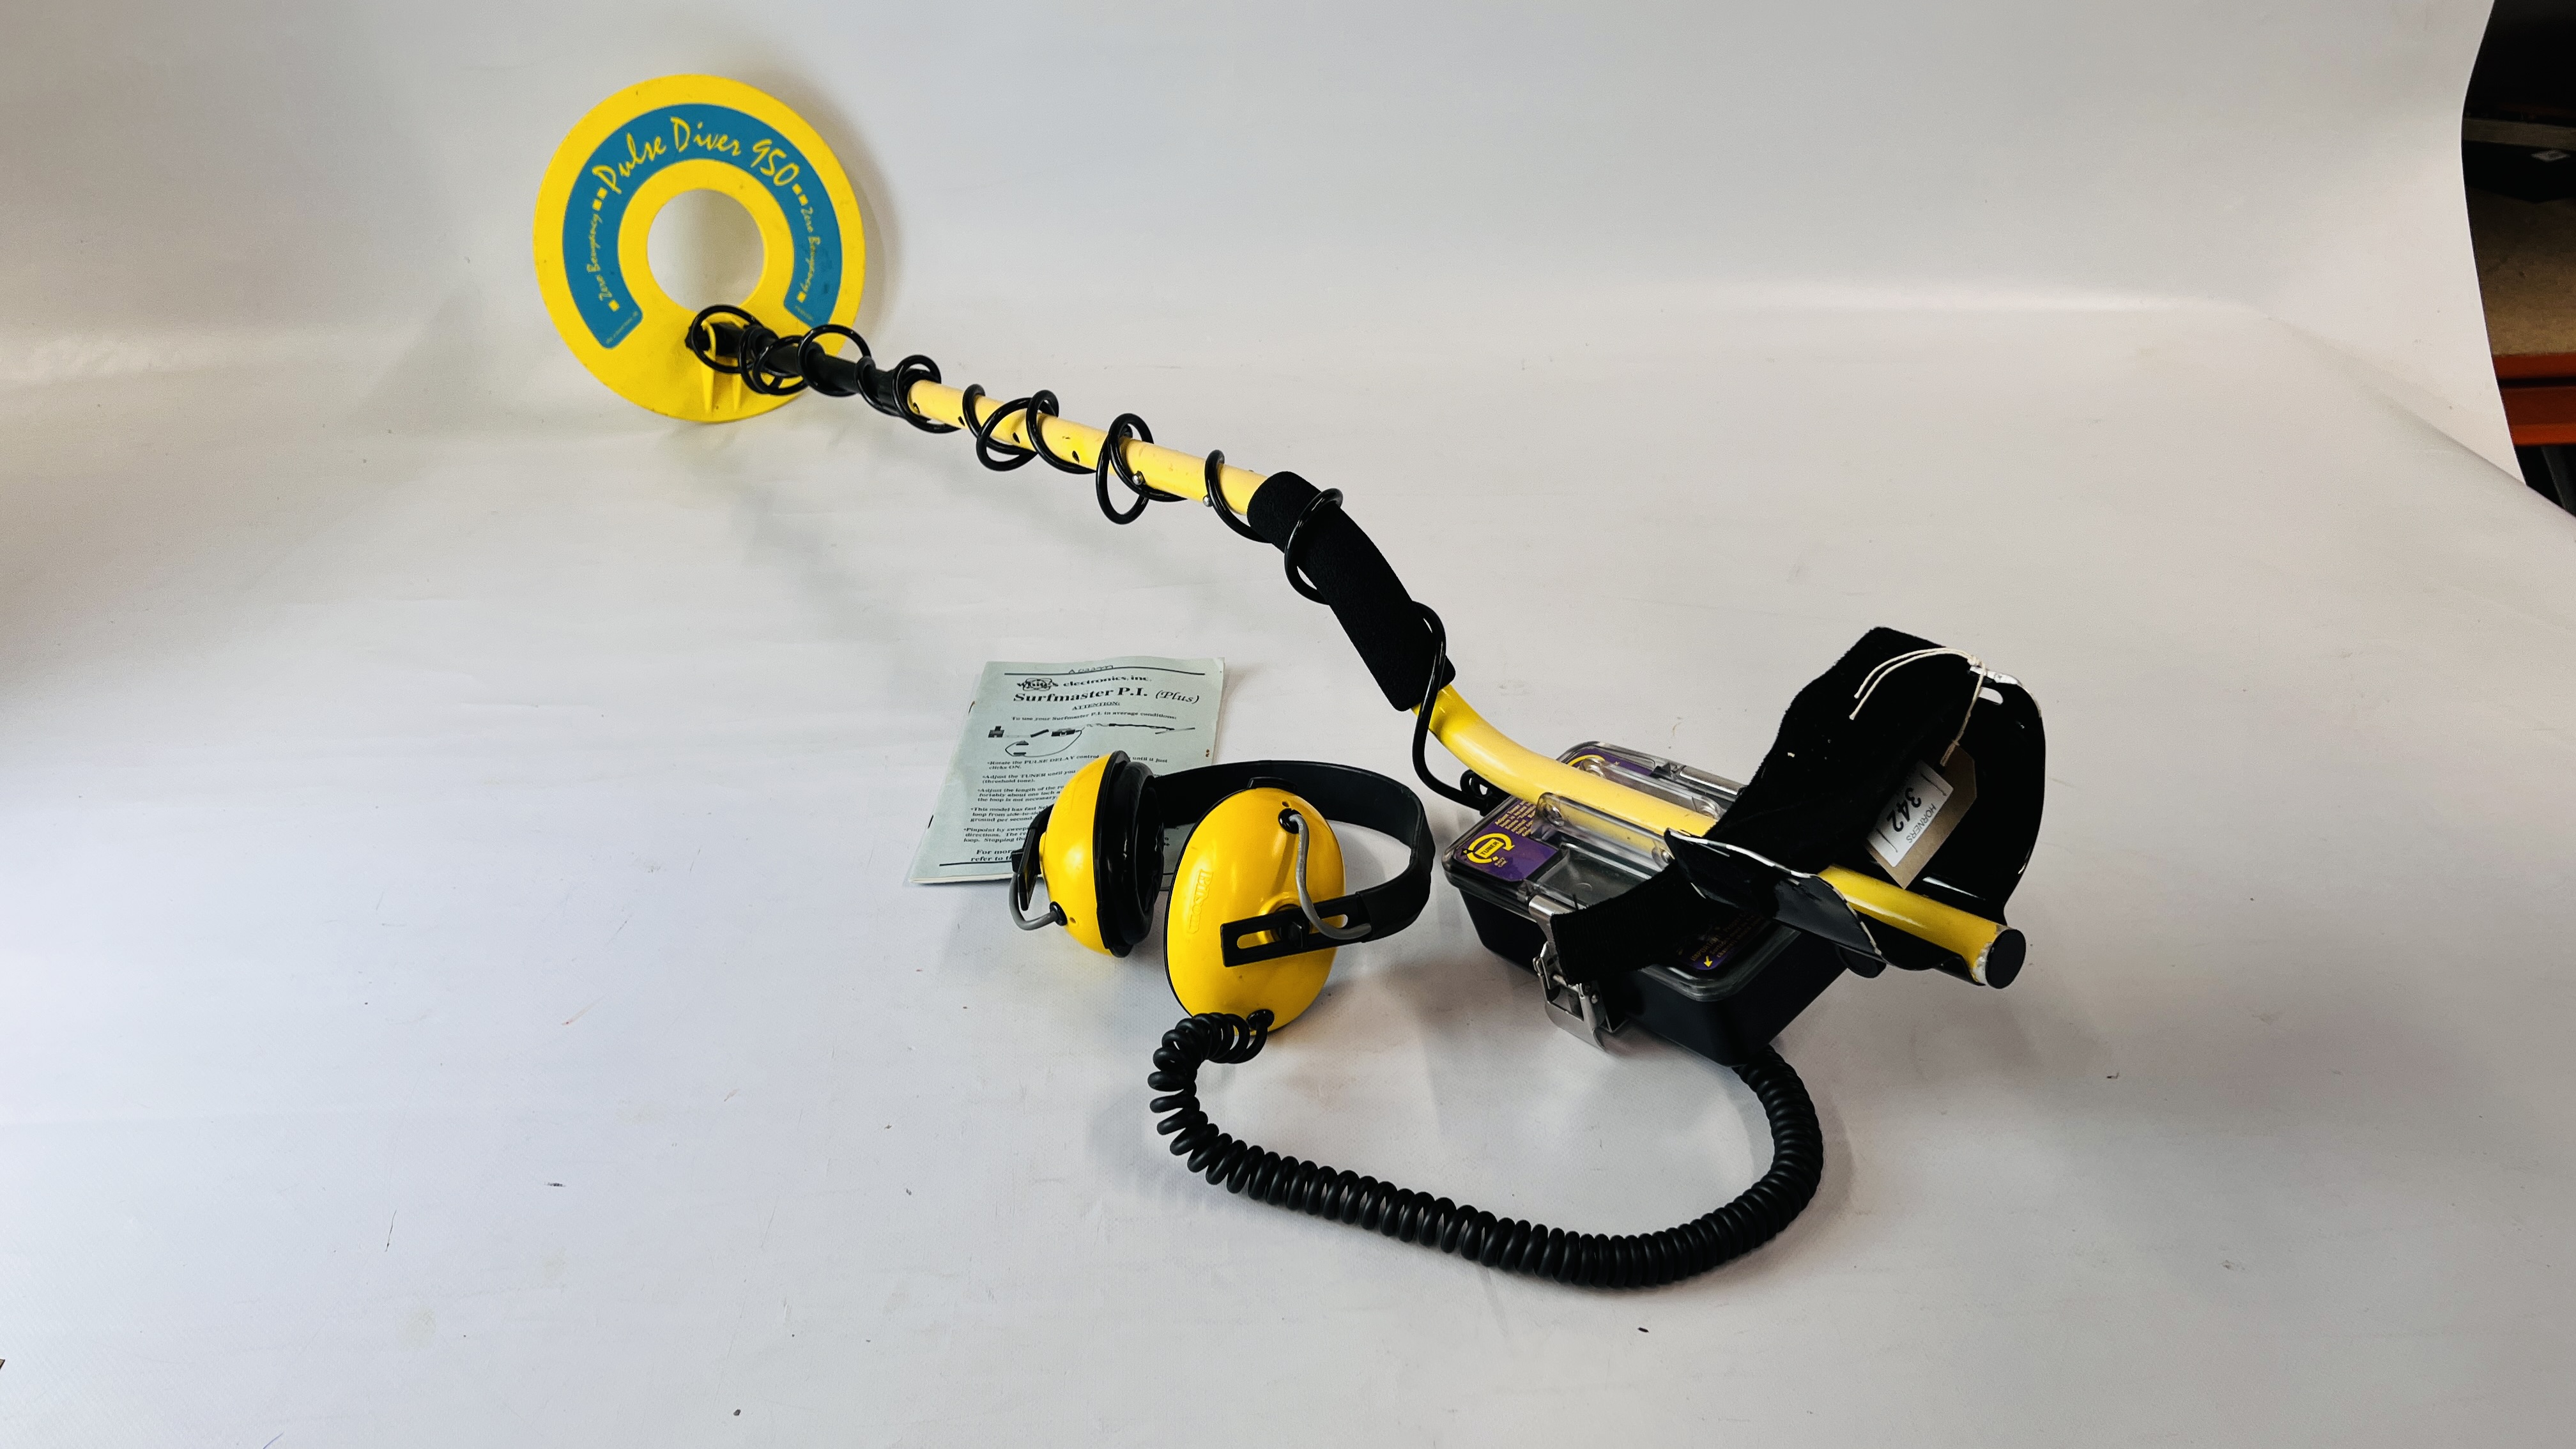 A WHITES SURFMASTER P1 PLUS METAL DETECTOR WITH PULSE DIVER 950 COIL AND BILSOM HEADPHONES AND